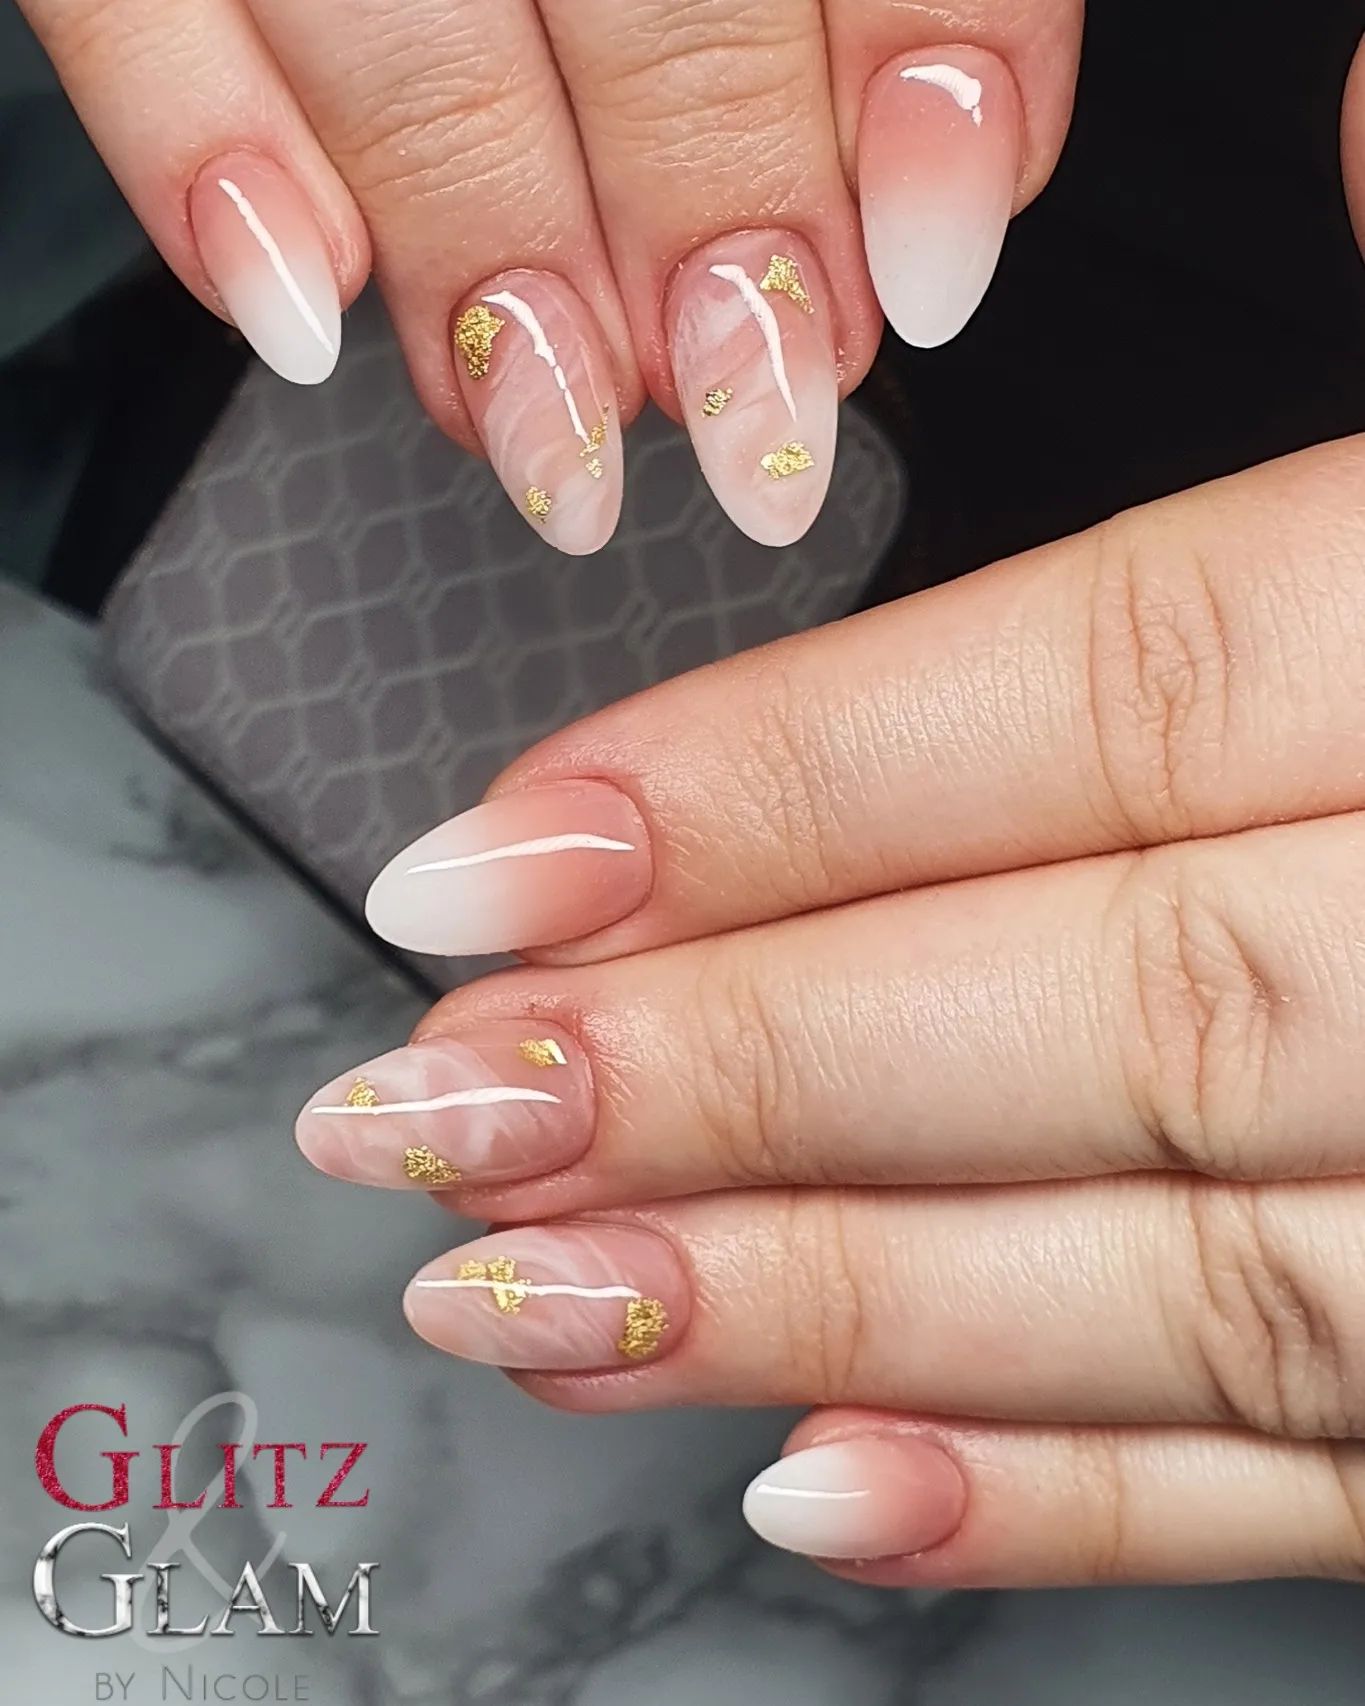 Oval and elegant, this nude manicure will suit women who like cute elegant nails that can work for both prom and office moments.